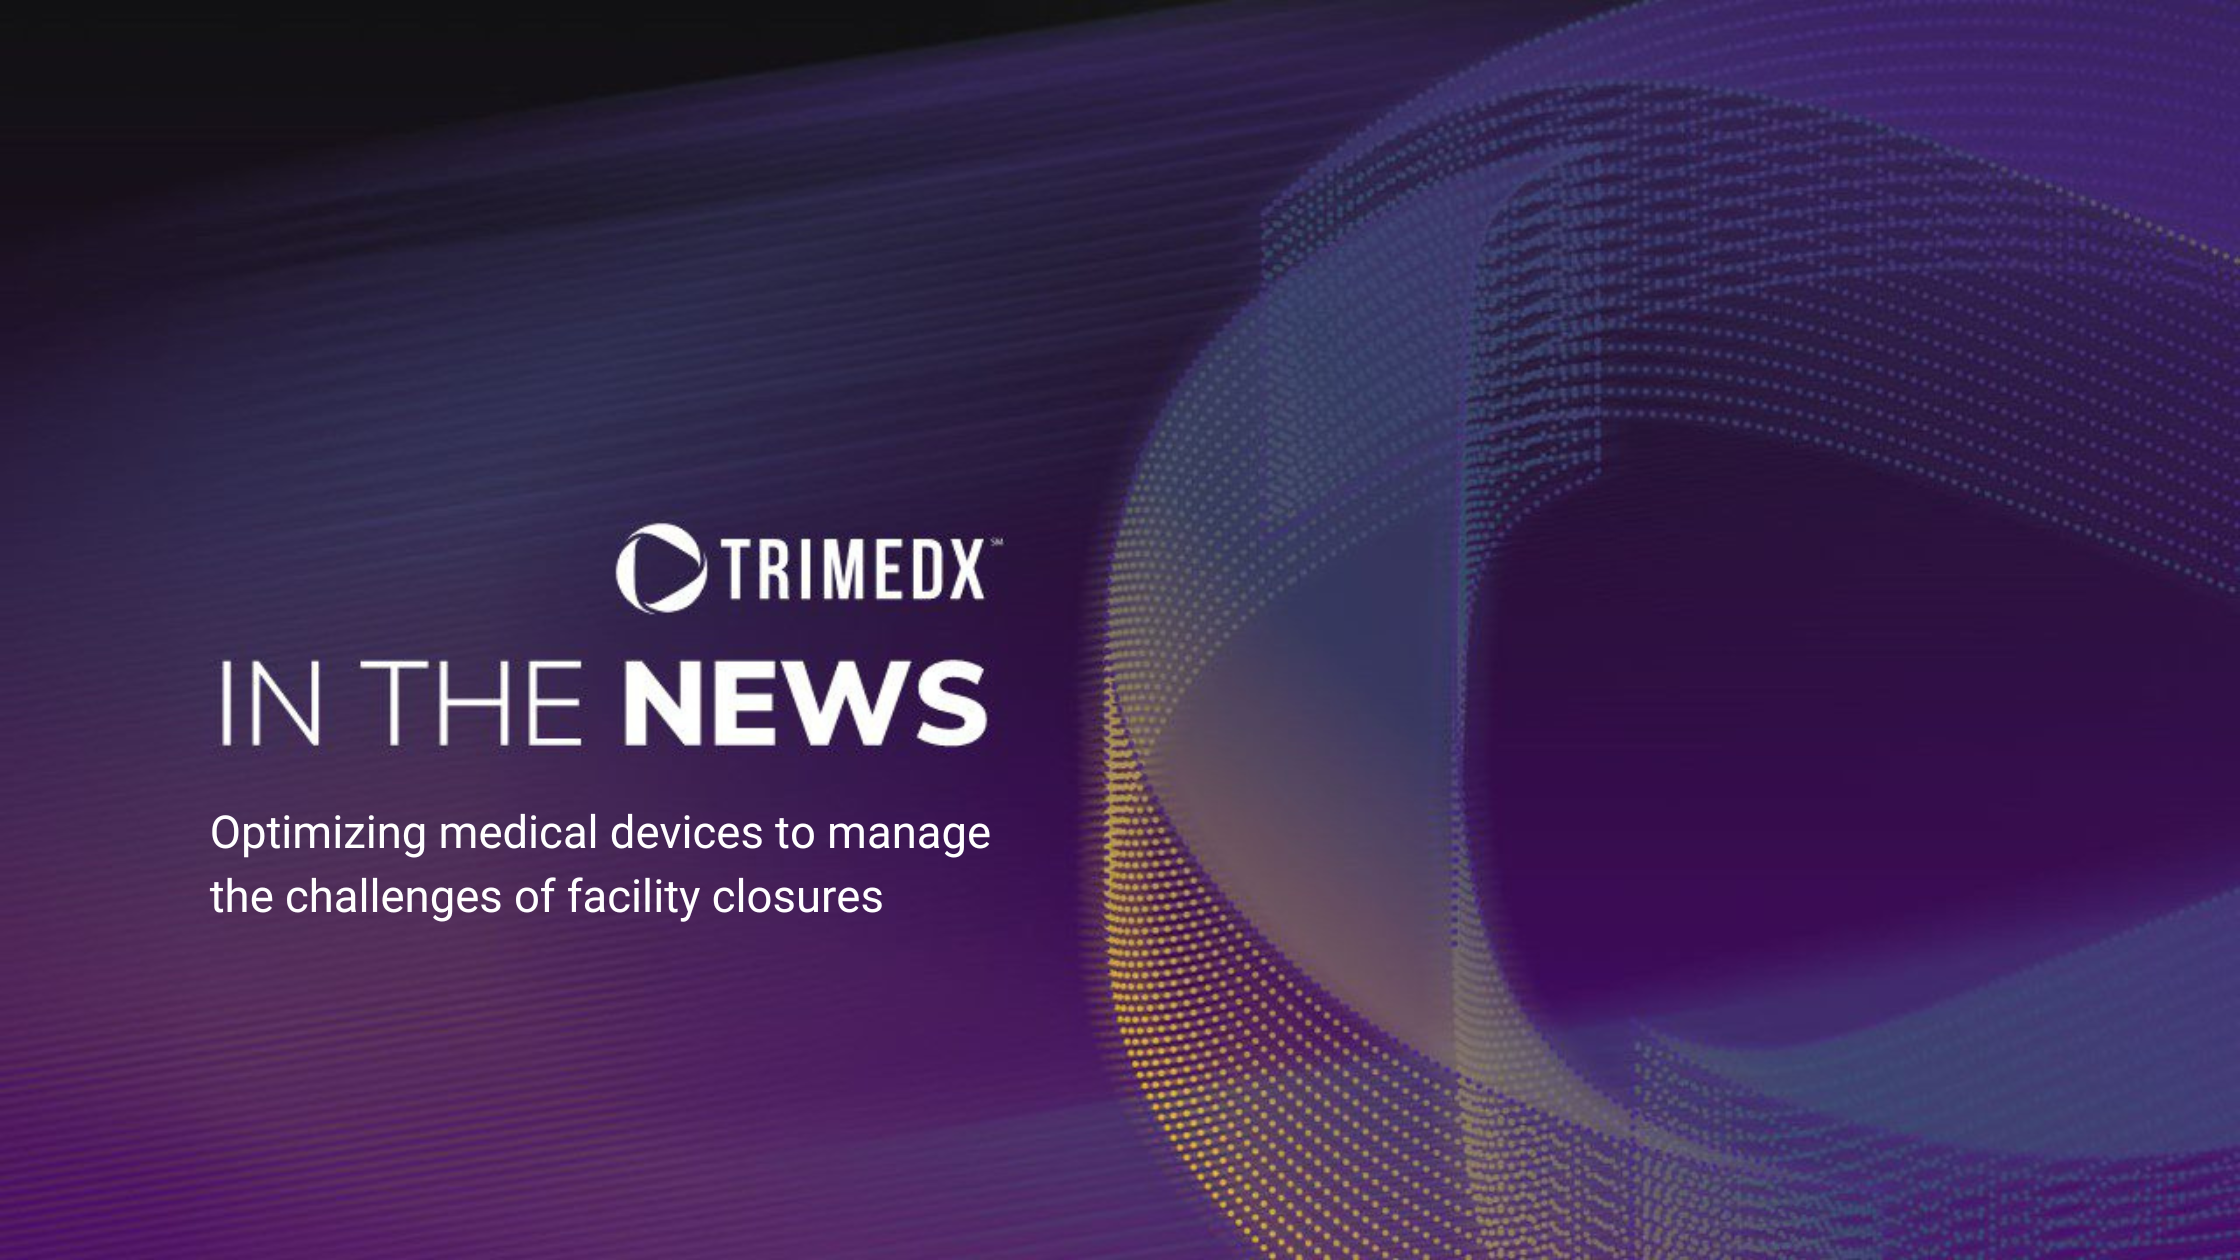 Optimizing medical devices to manage the challenges of facility closures in the news